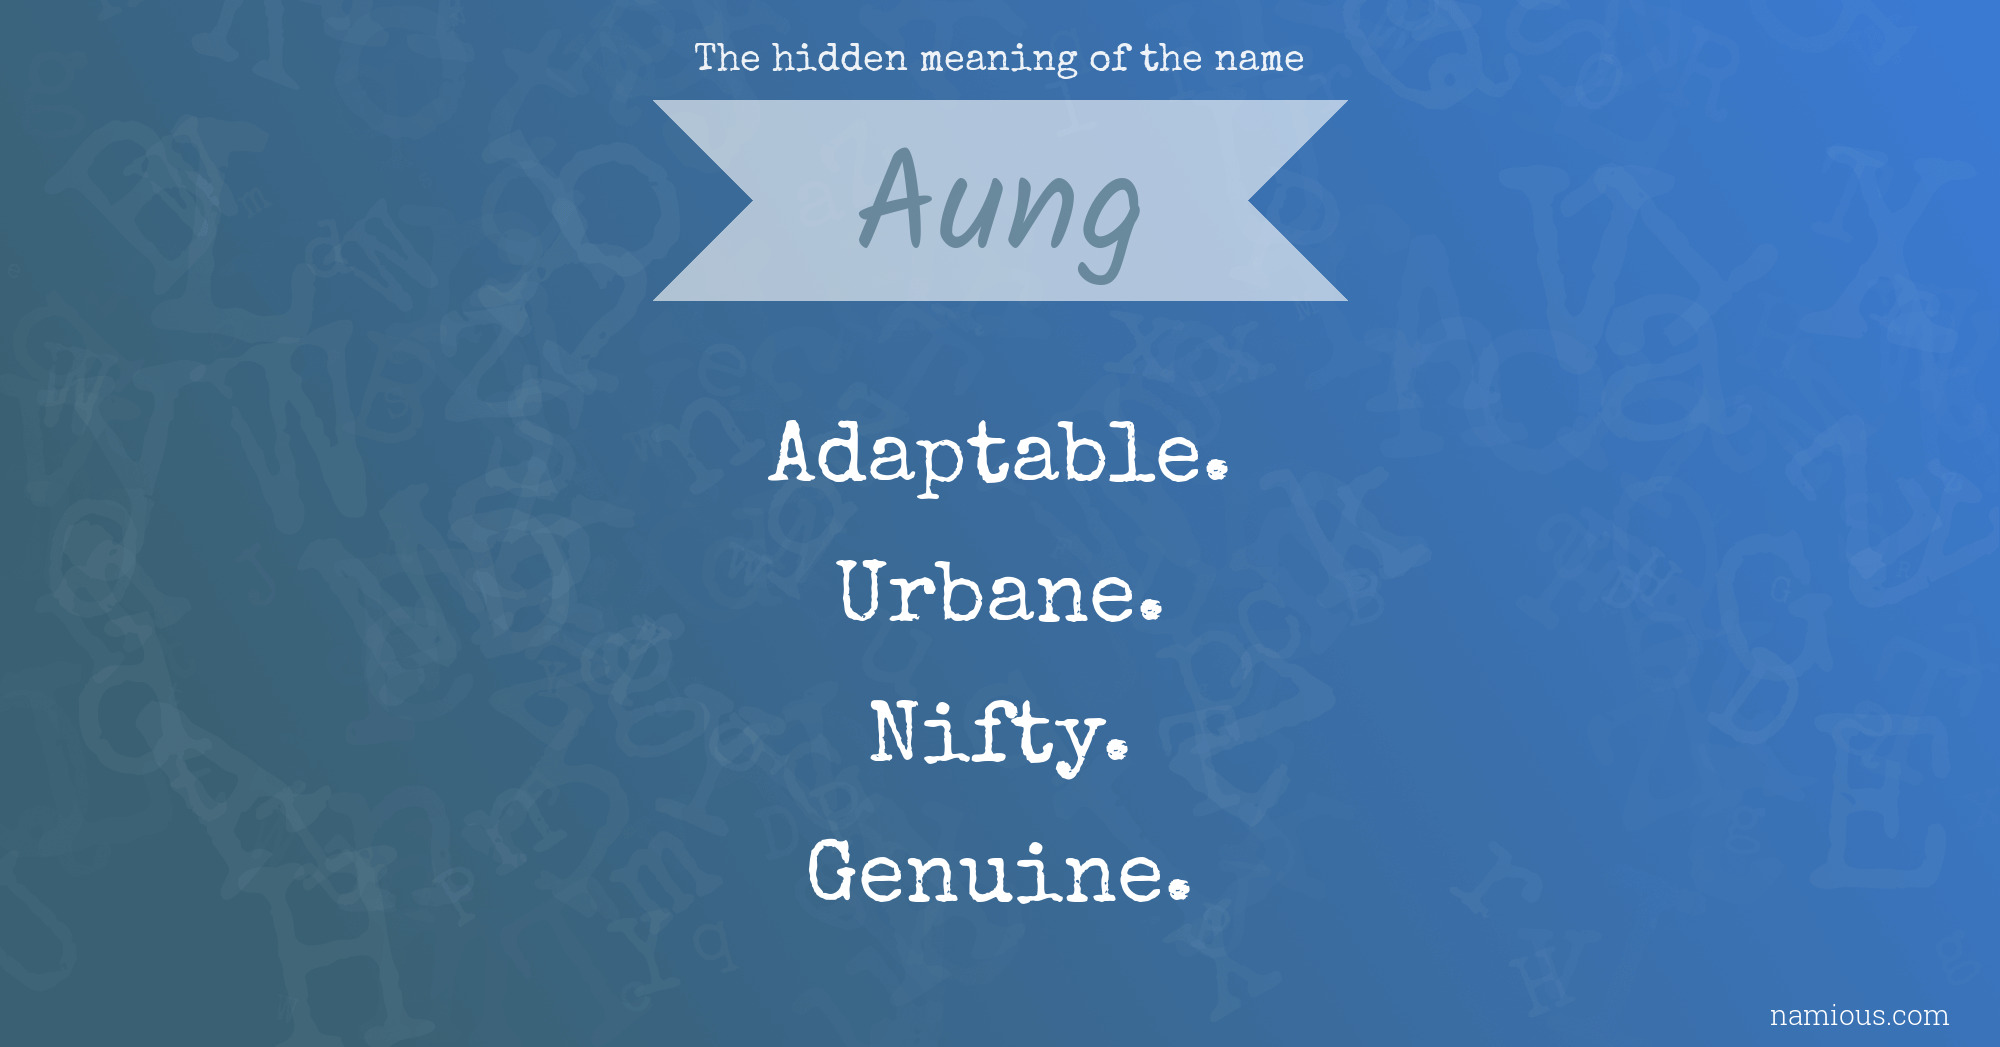 The hidden meaning of the name Aung